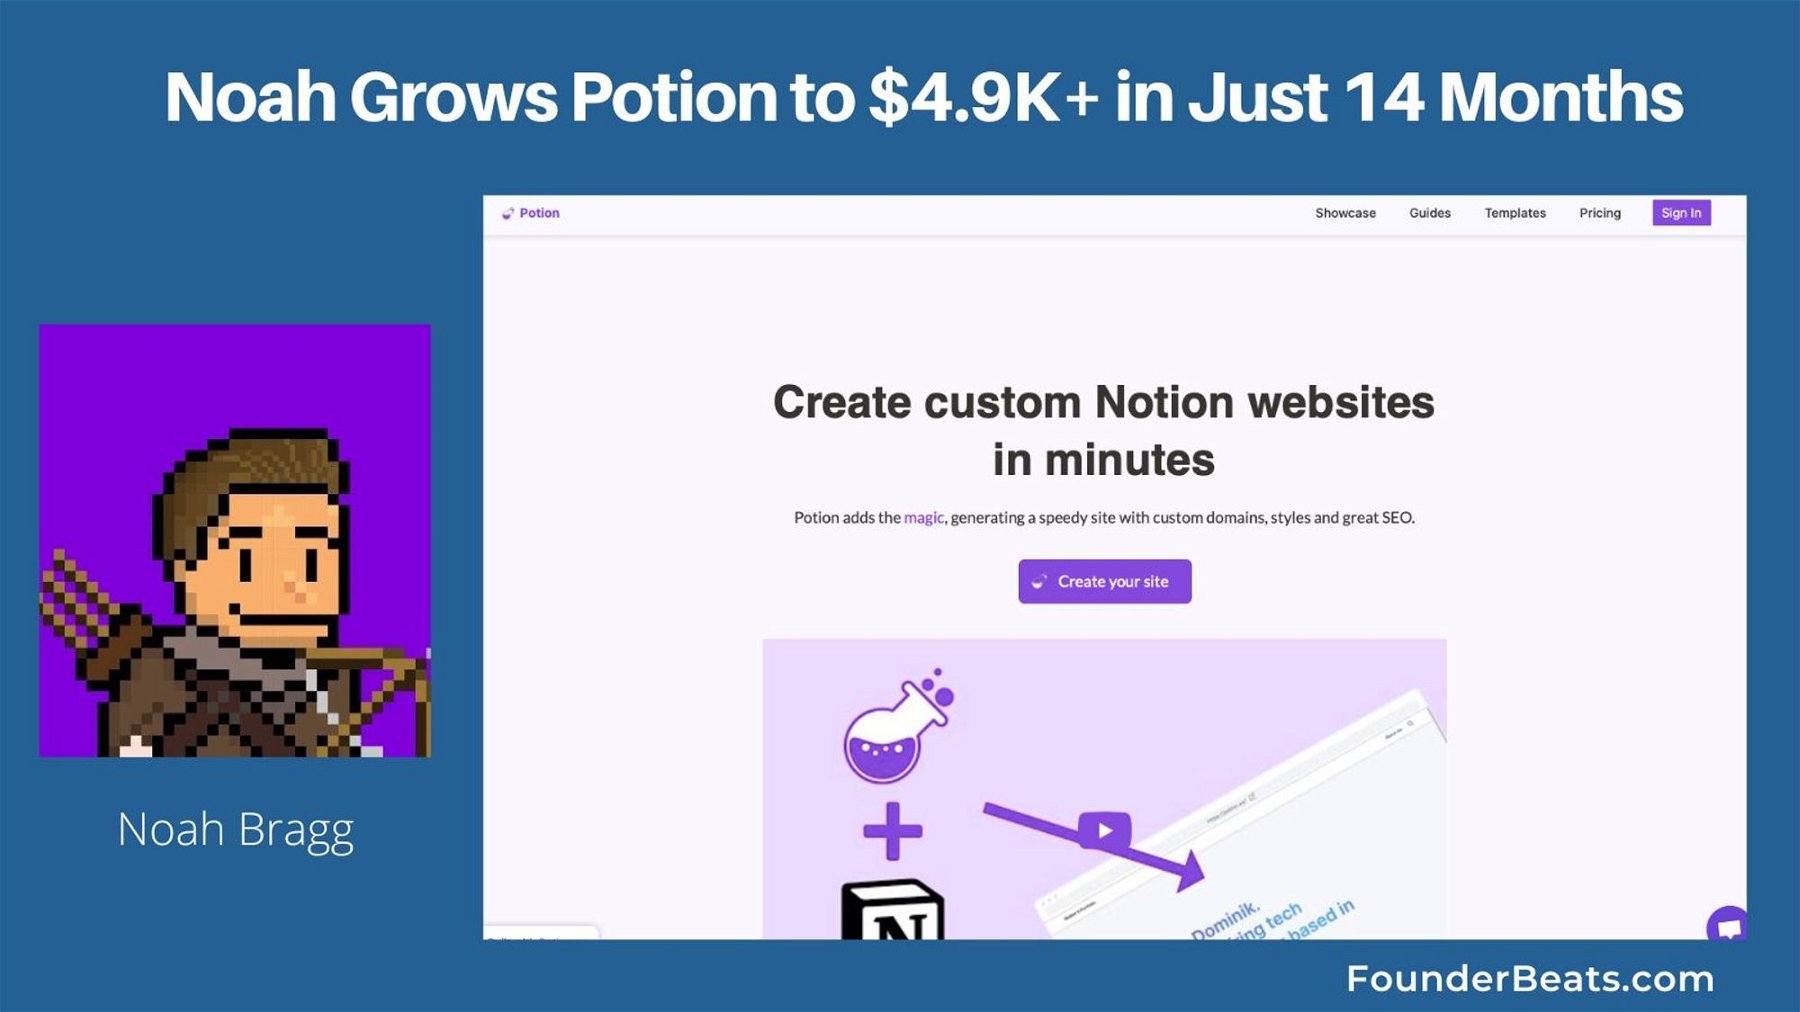 Noah Grows Potion to $4.9K+ in Just 14 Months